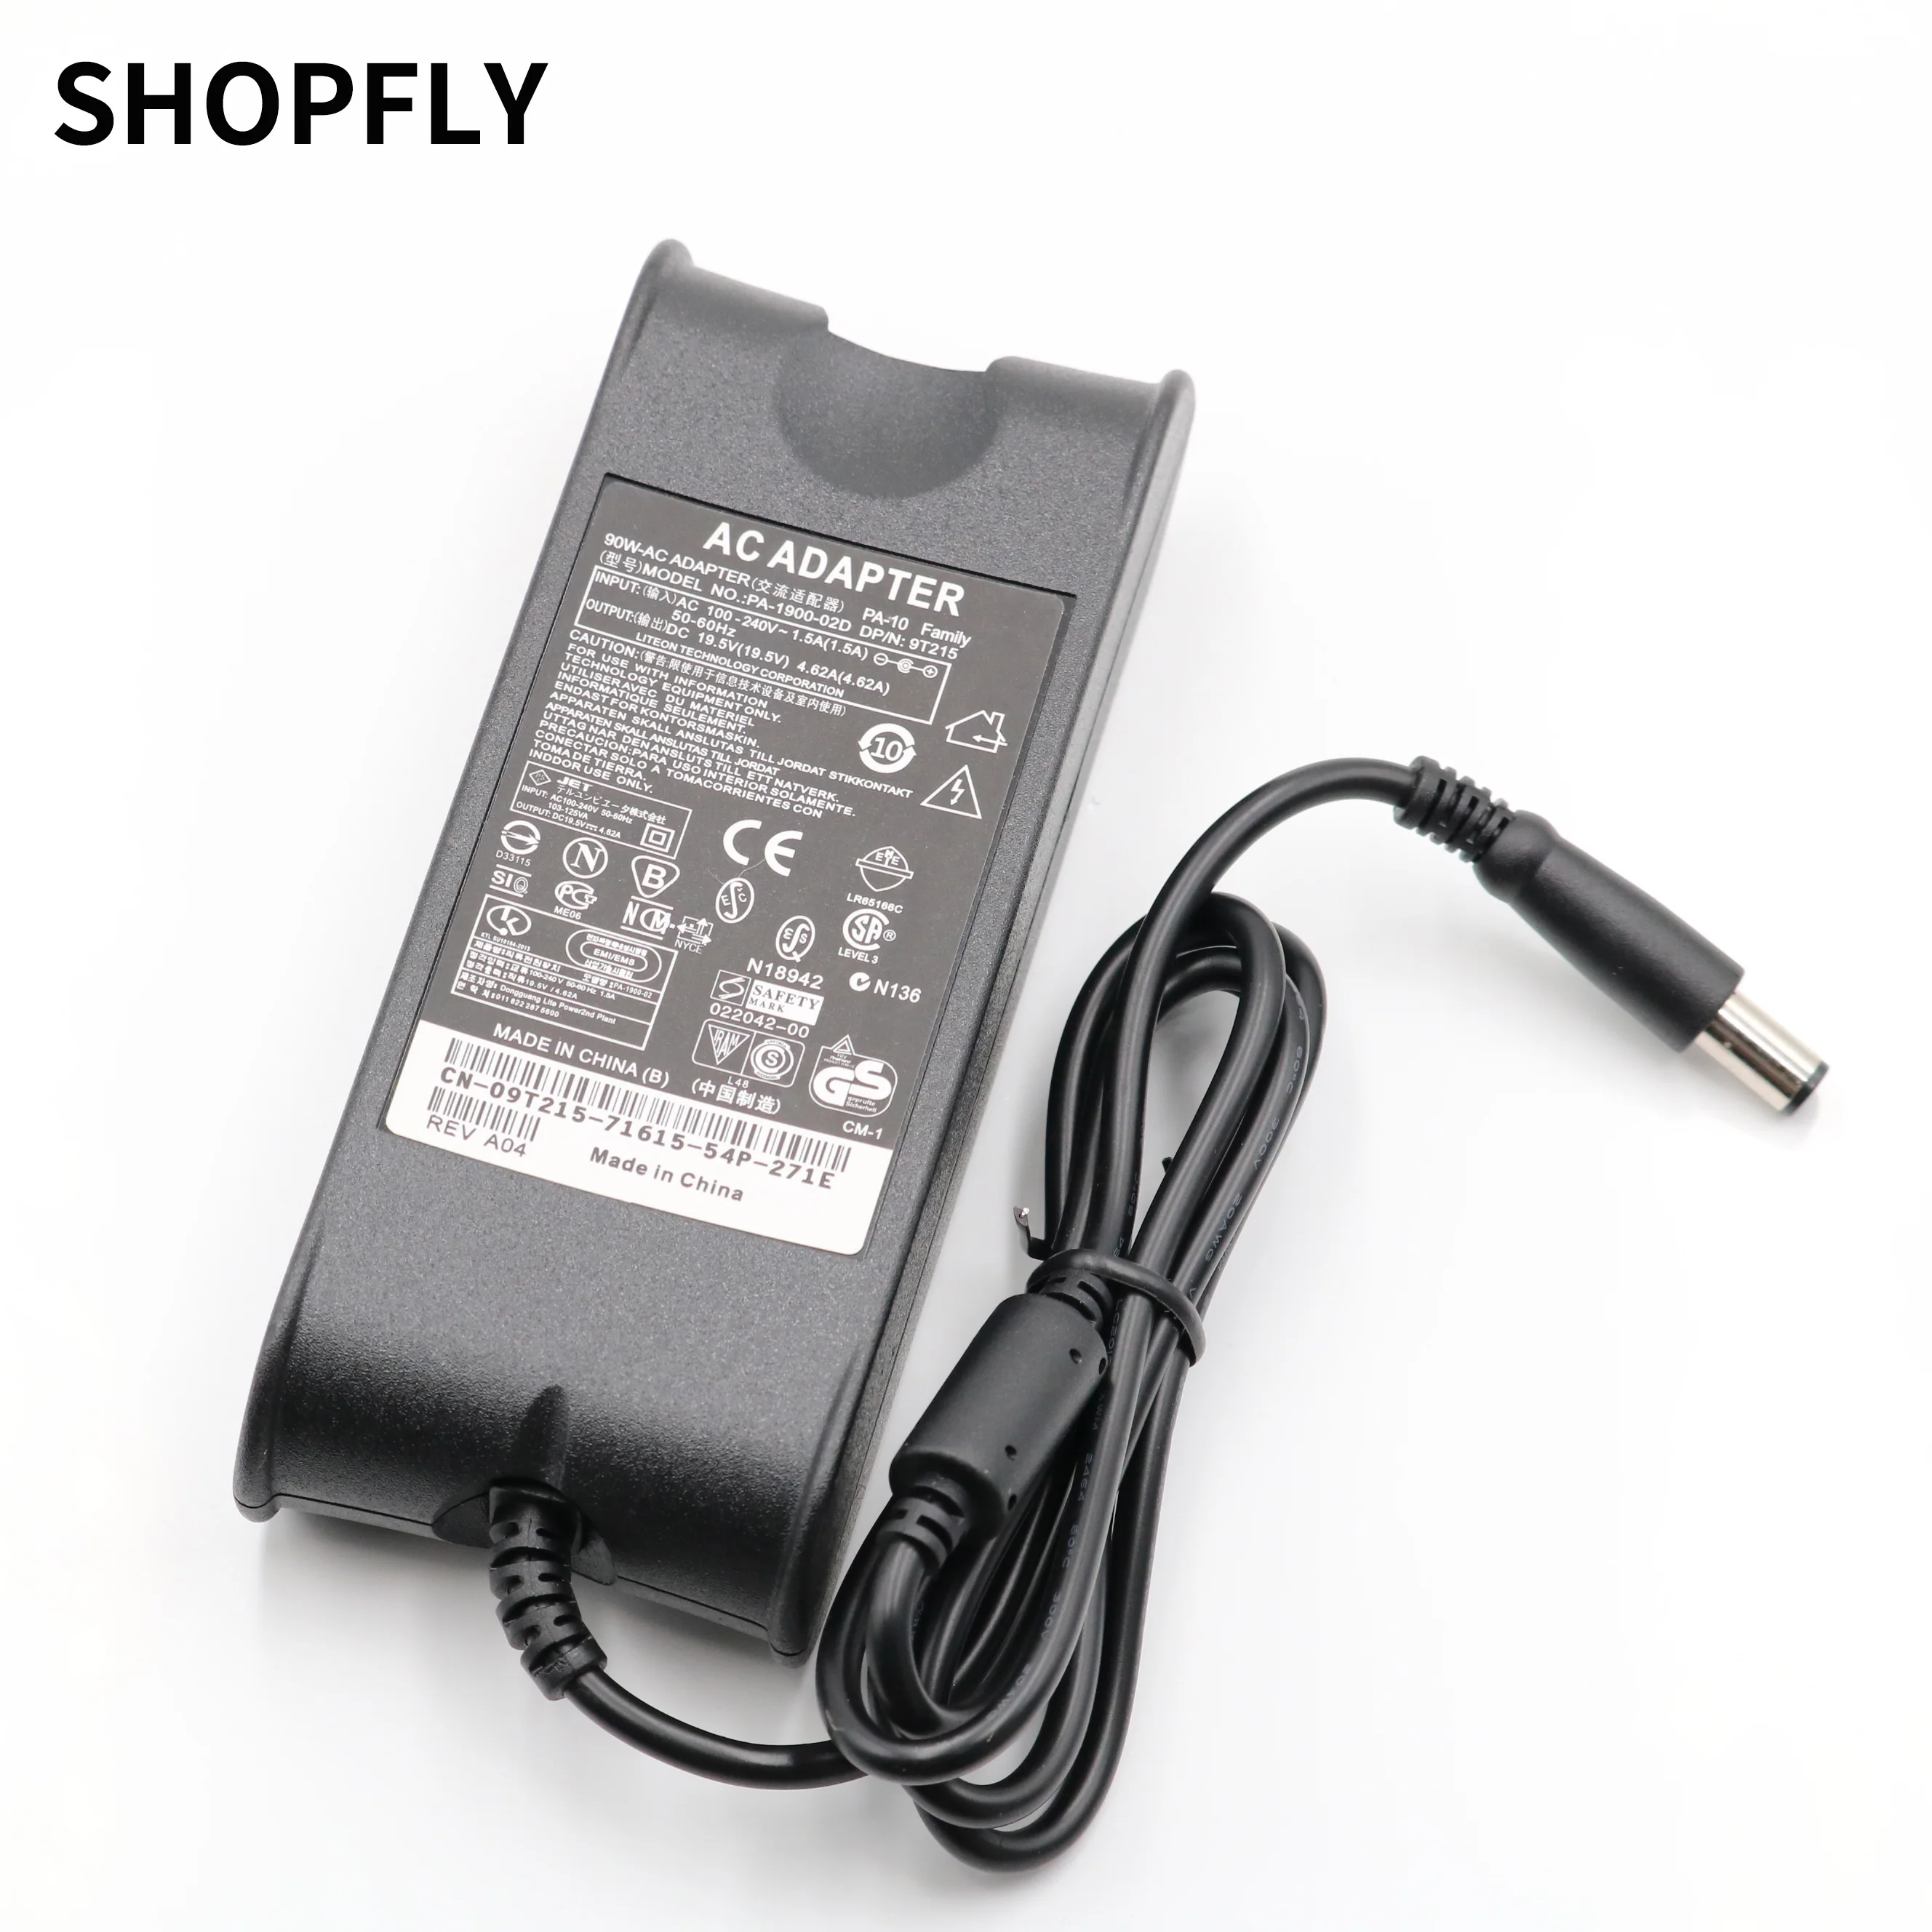 19.5V 4.62A AC Laptop Adapter For Dell Inspiron 1150 700m n5110 Black Dell  Laptop Charger 90W Notebook Computer Adapter|Laptop Adapter| - AliExpress